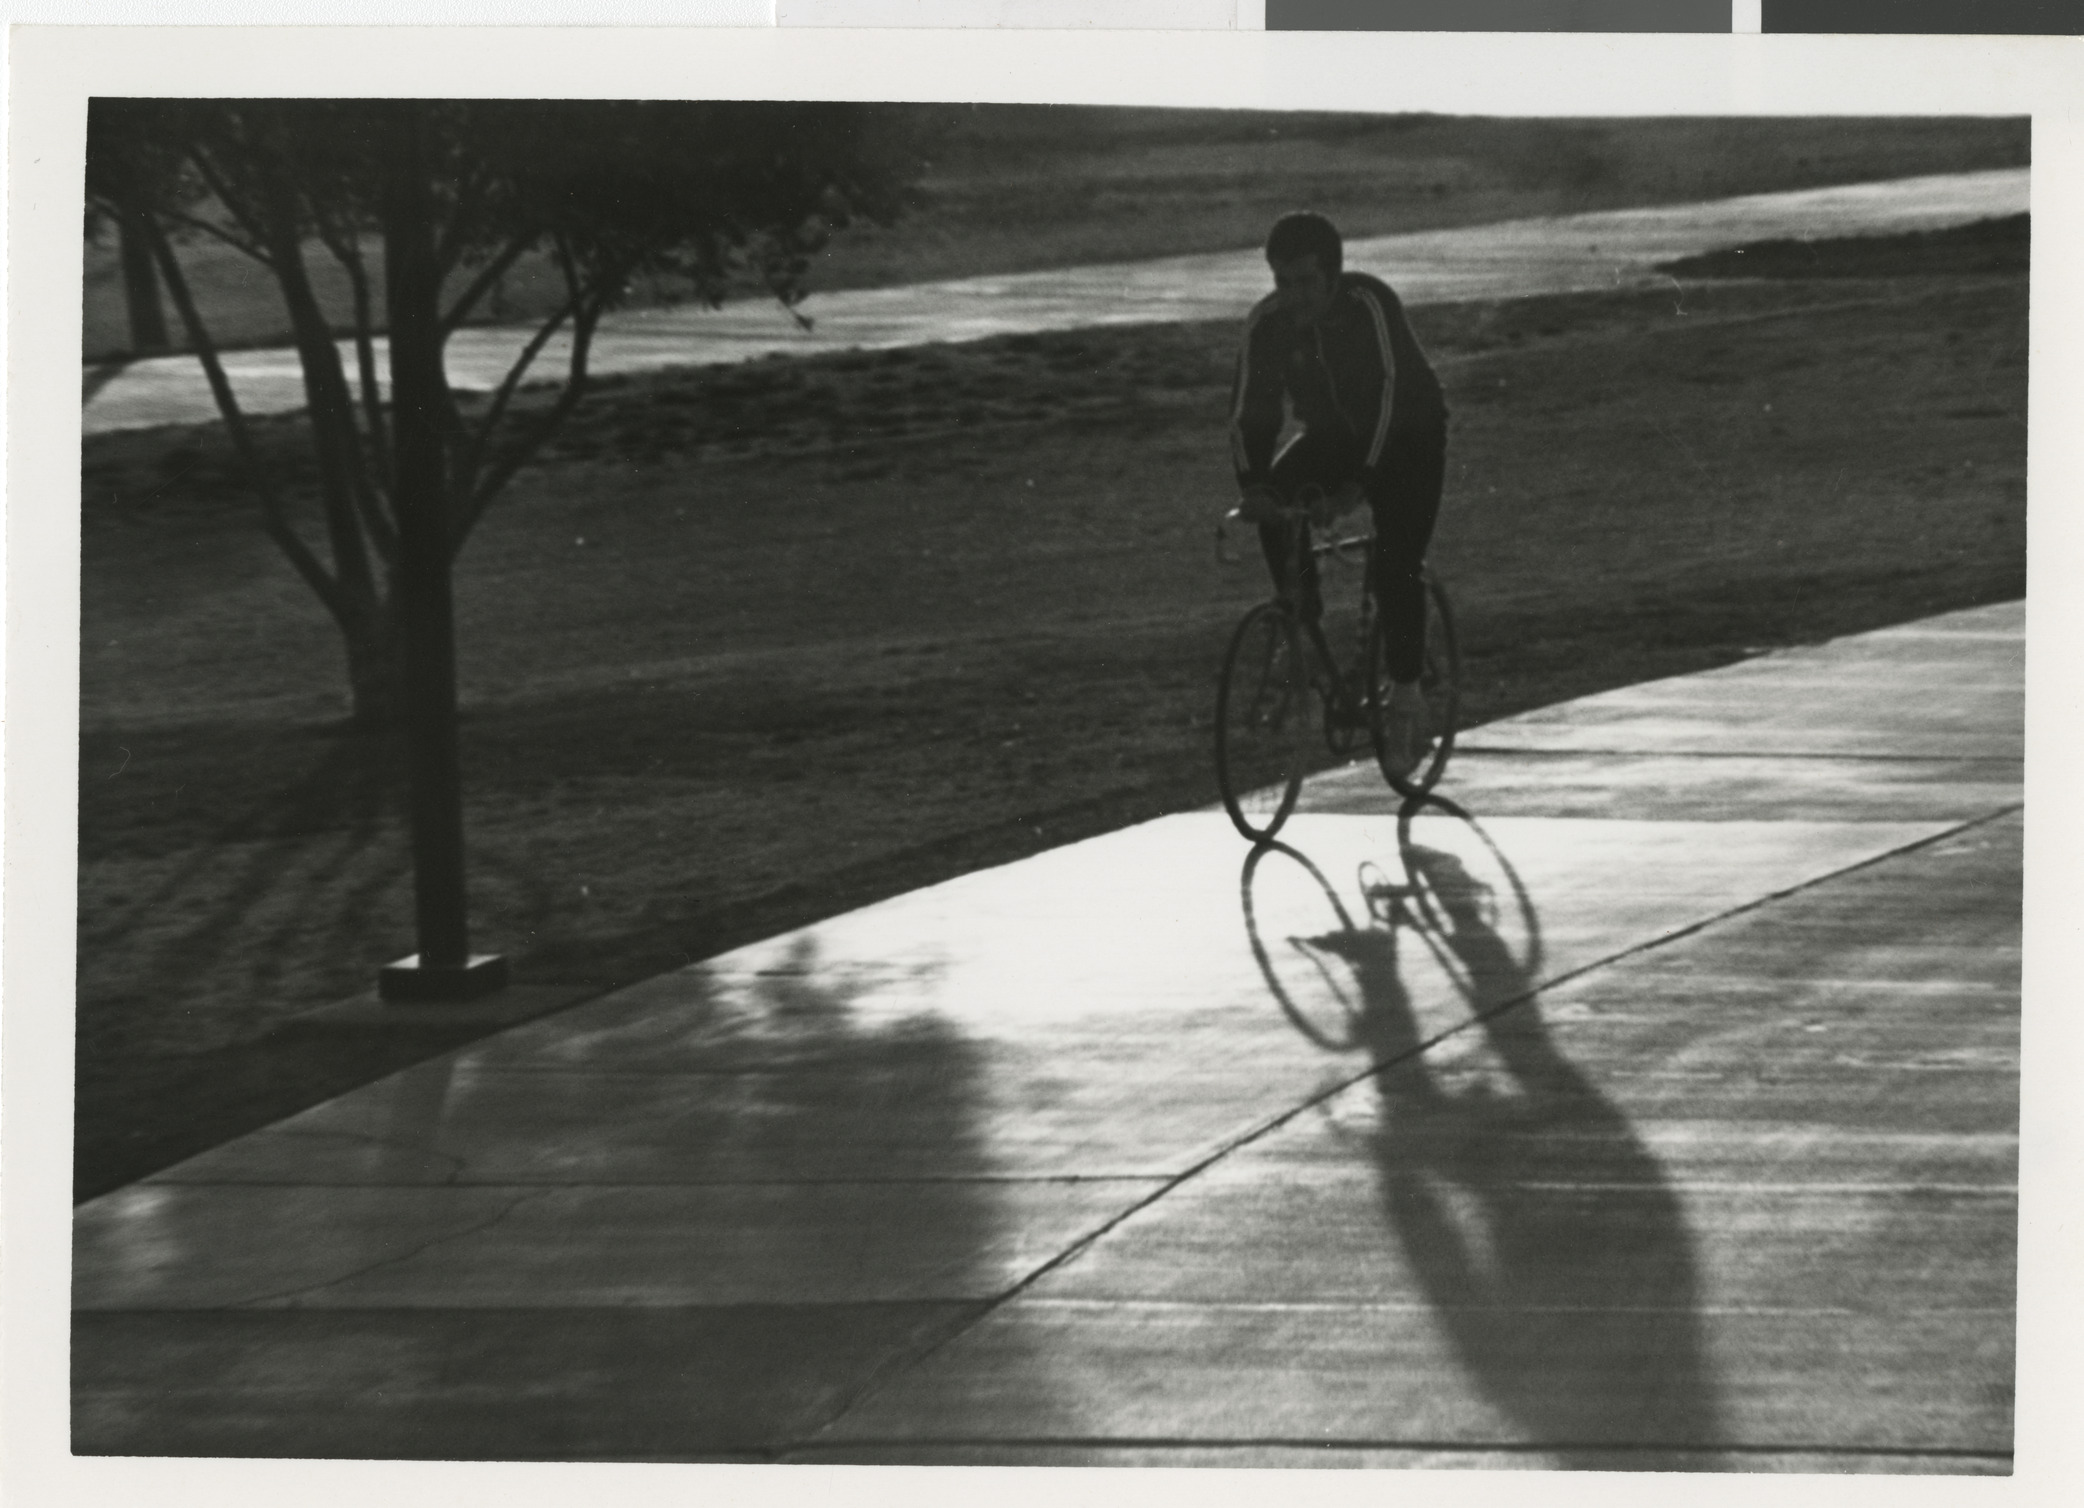 Photograph of Ron Lurie riding a bicycle